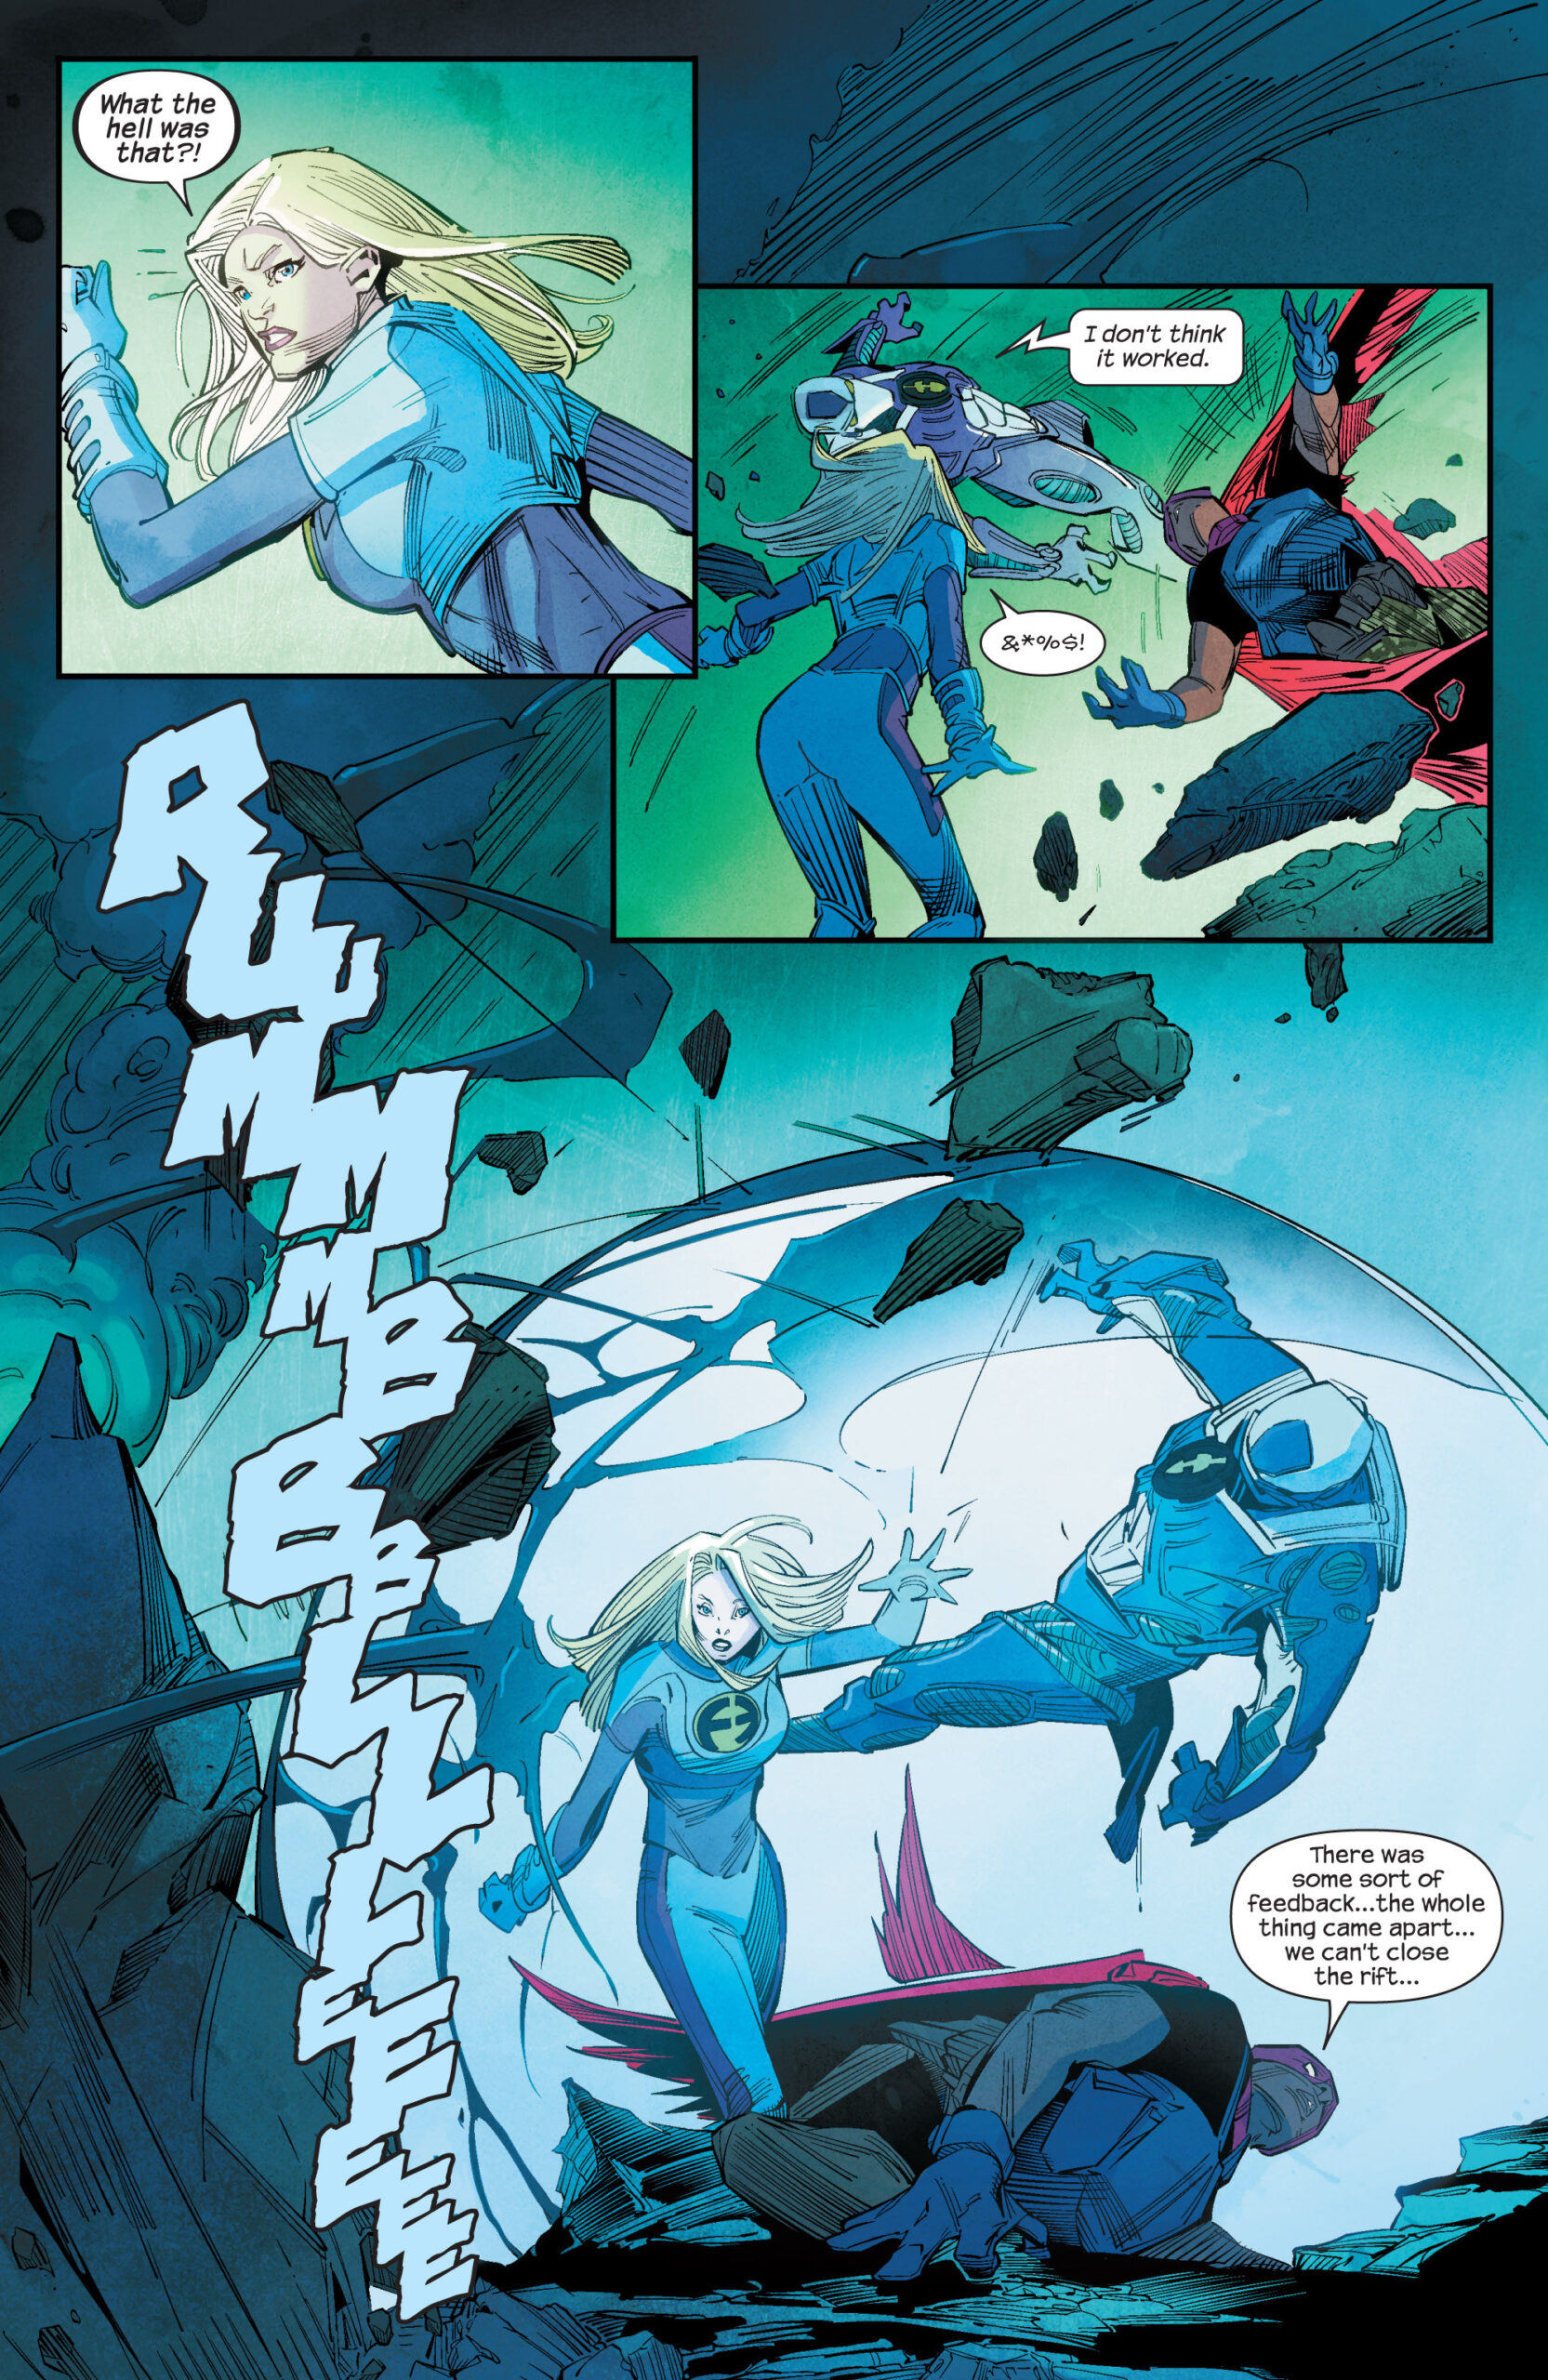 Sue Storm protects her new Fantastic Four teammates Iron Man and Falcon from an unknown threat in Ultimate FF Vol. 1 #1 "Doomed" (2014), Marvel Comics